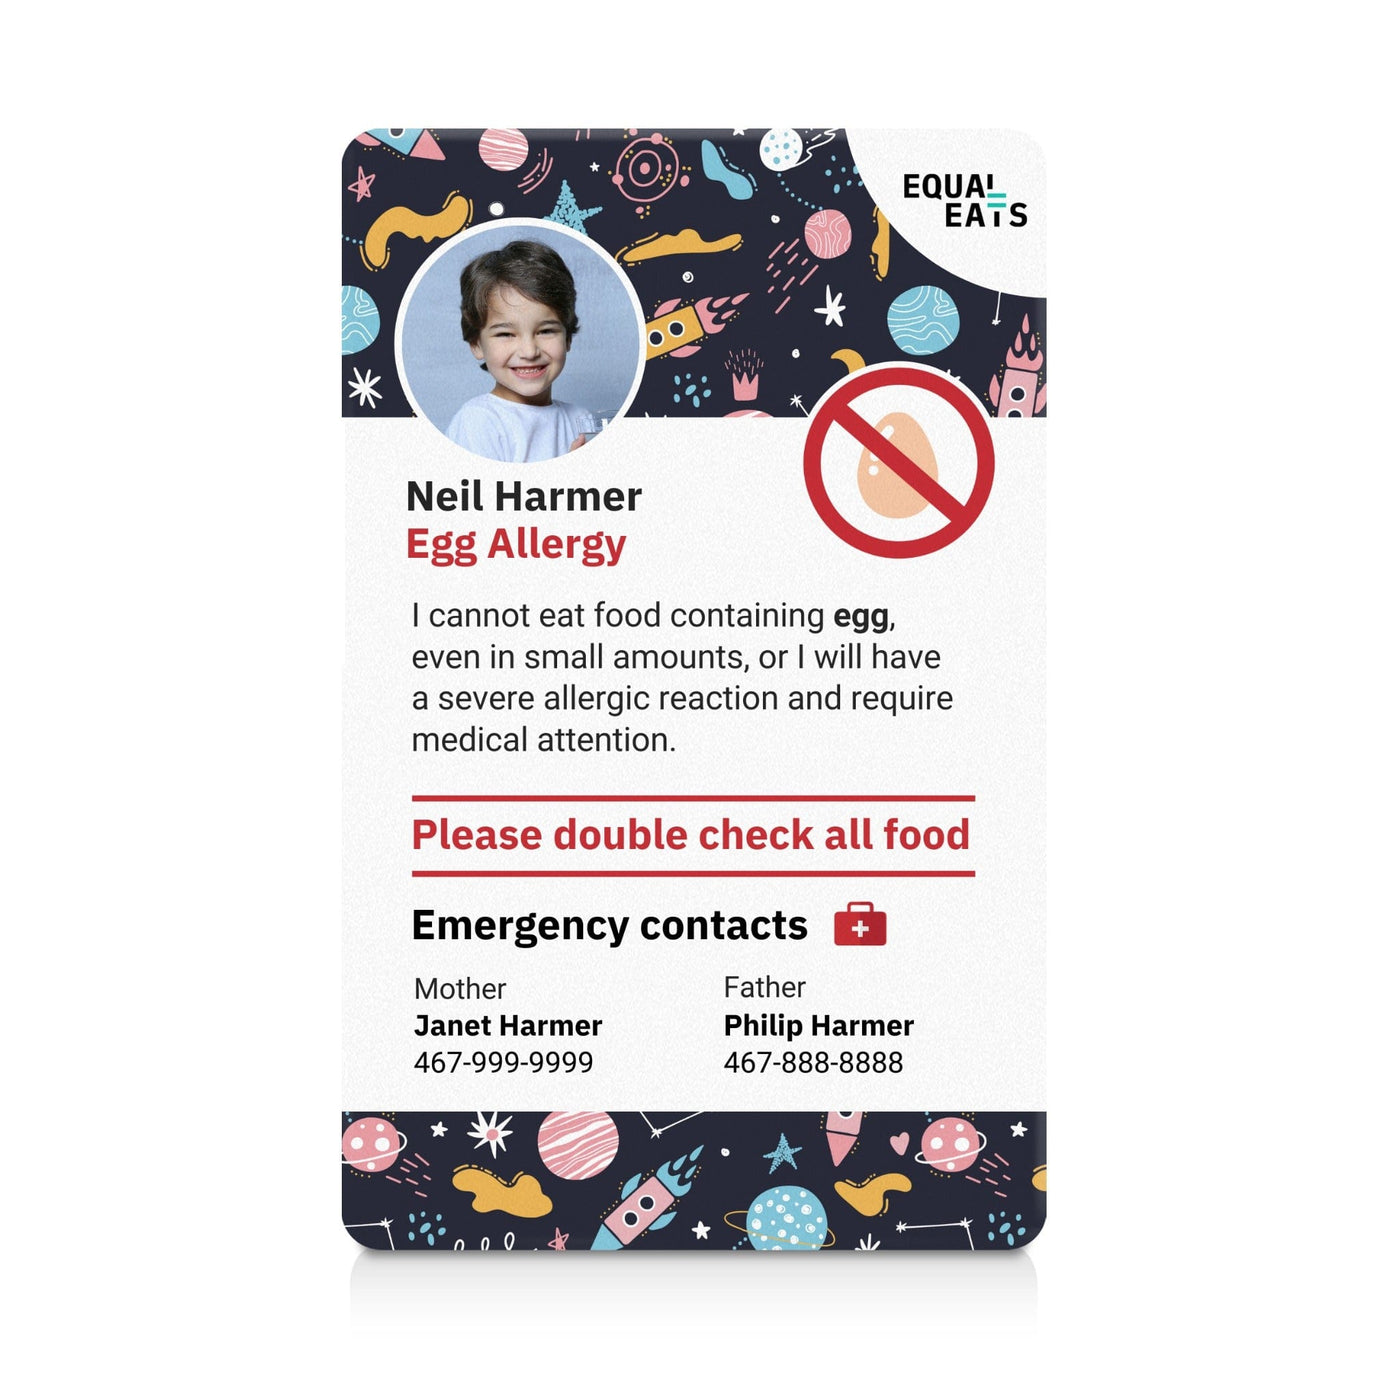 Space Egg Allergy ID Card (EqualEats)